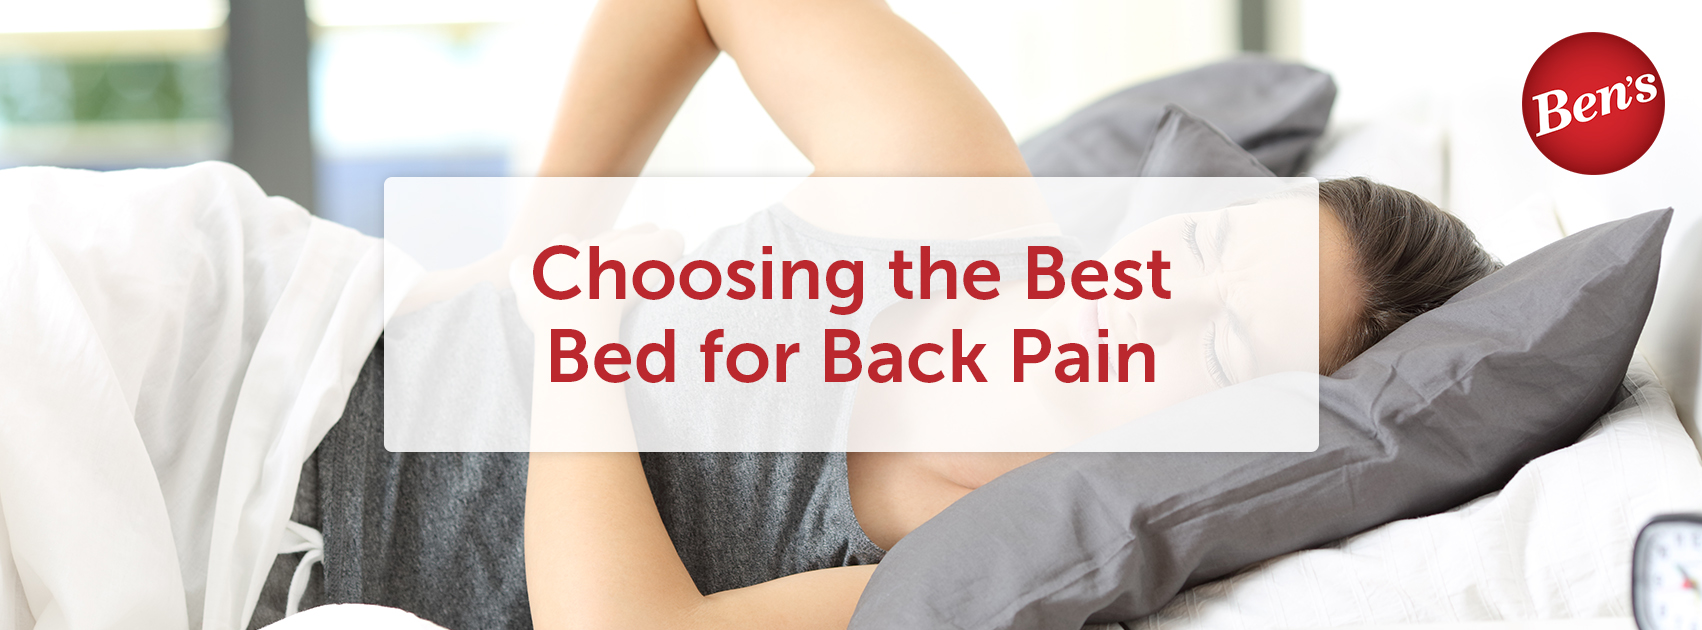 Choosing the Best Bed for Back Pain